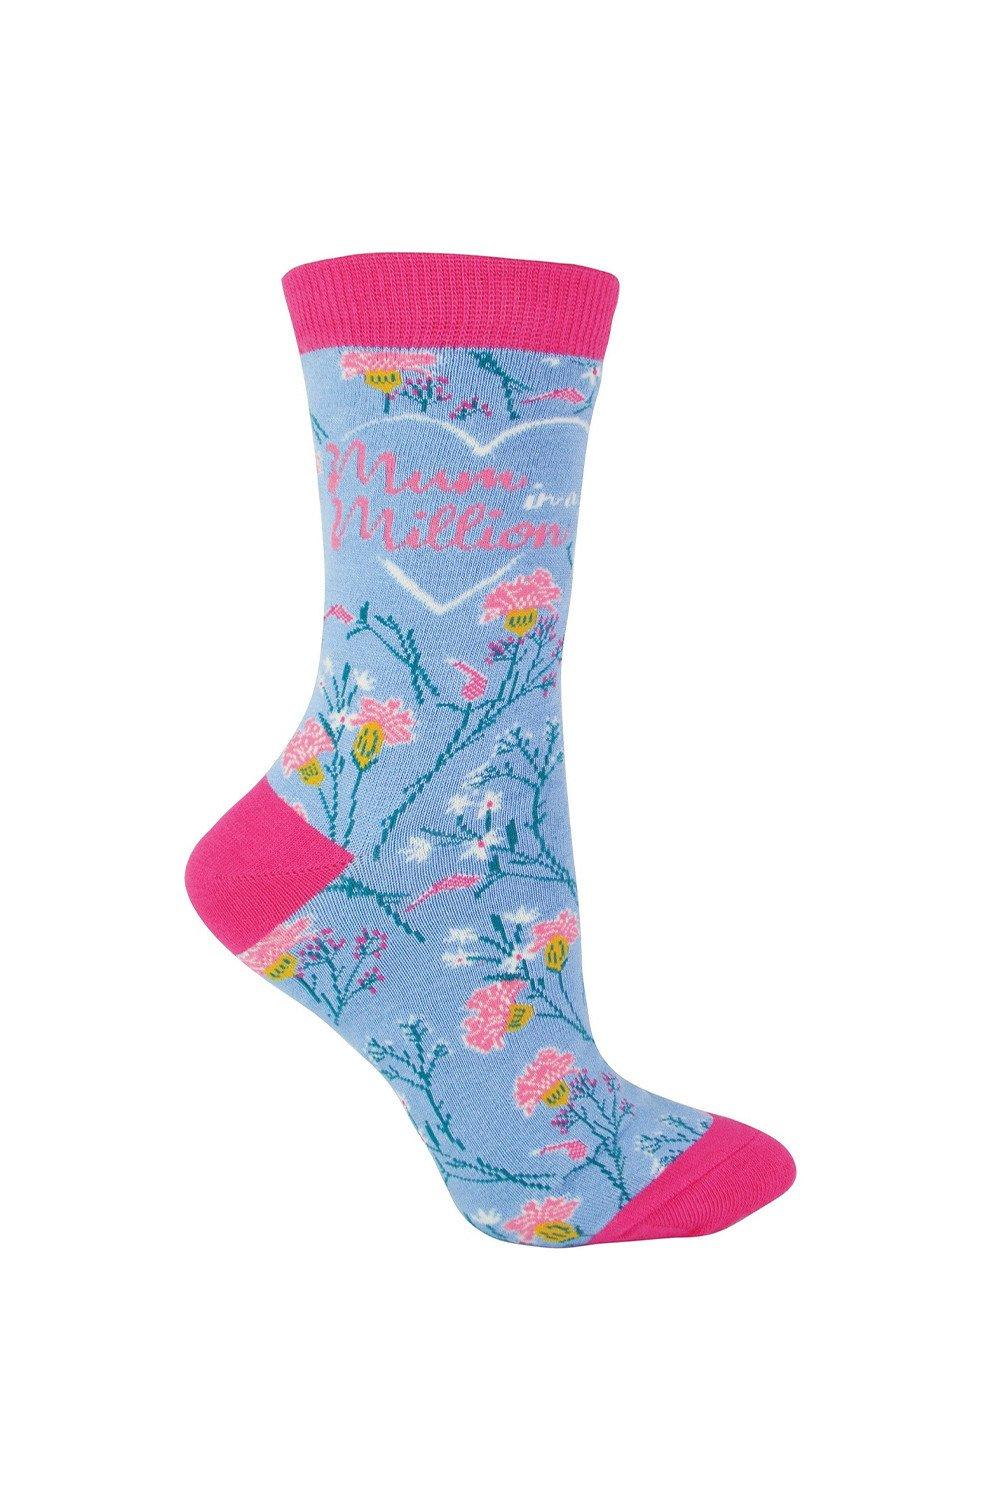 Mum Socks Floral Patterned Bamboo Socks Gift for Mothers Day